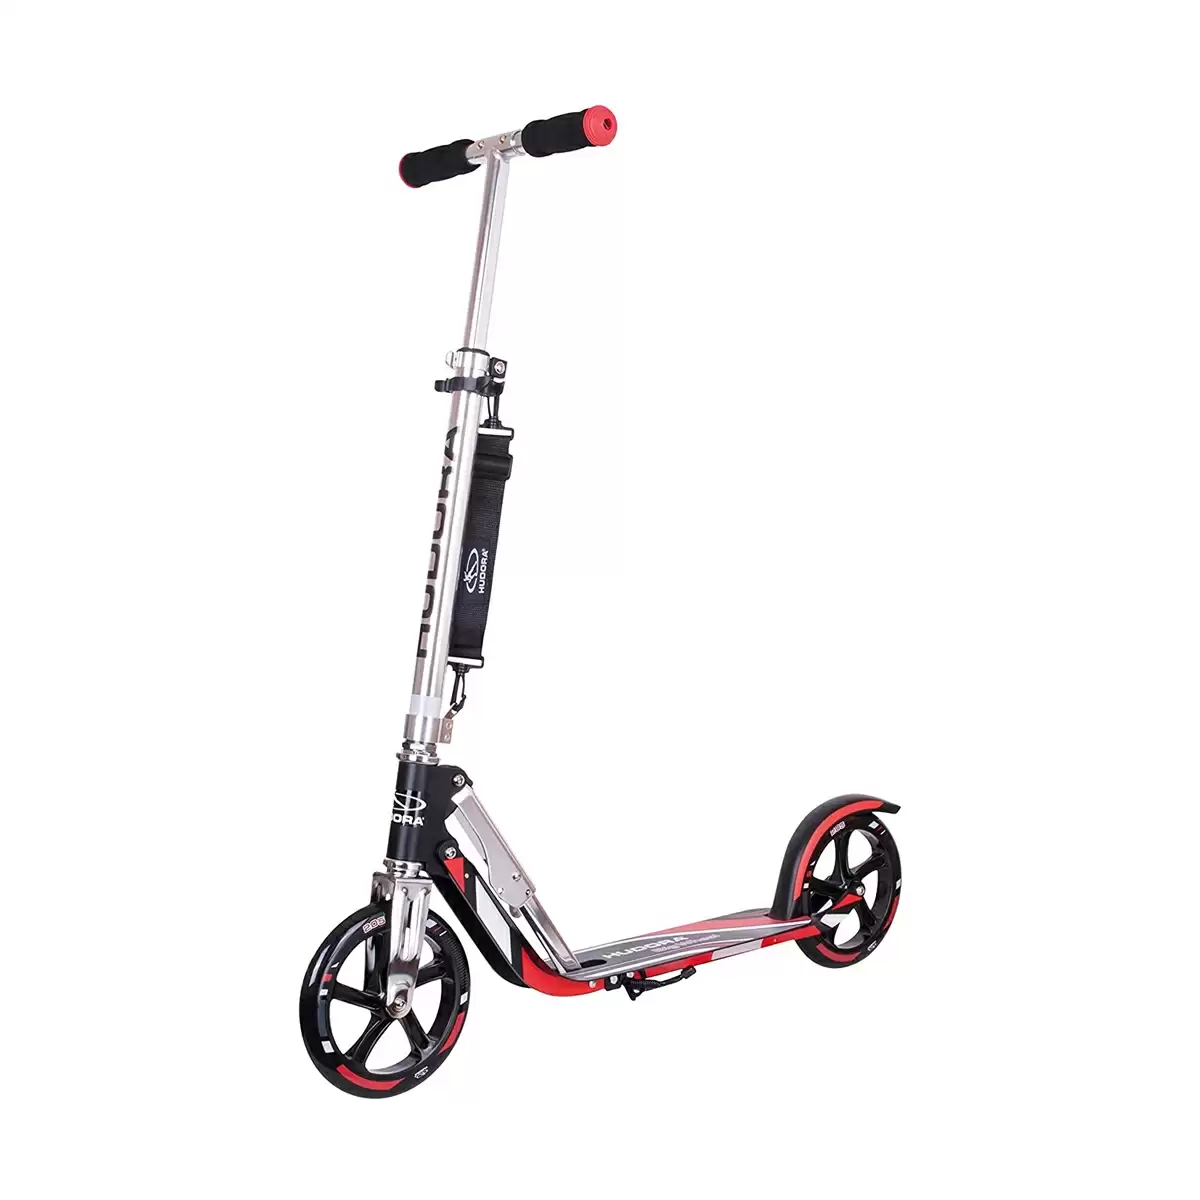 City scooter Big Wheel 8'' 205RX 205mm Rx Design Black/Silver/Red - image